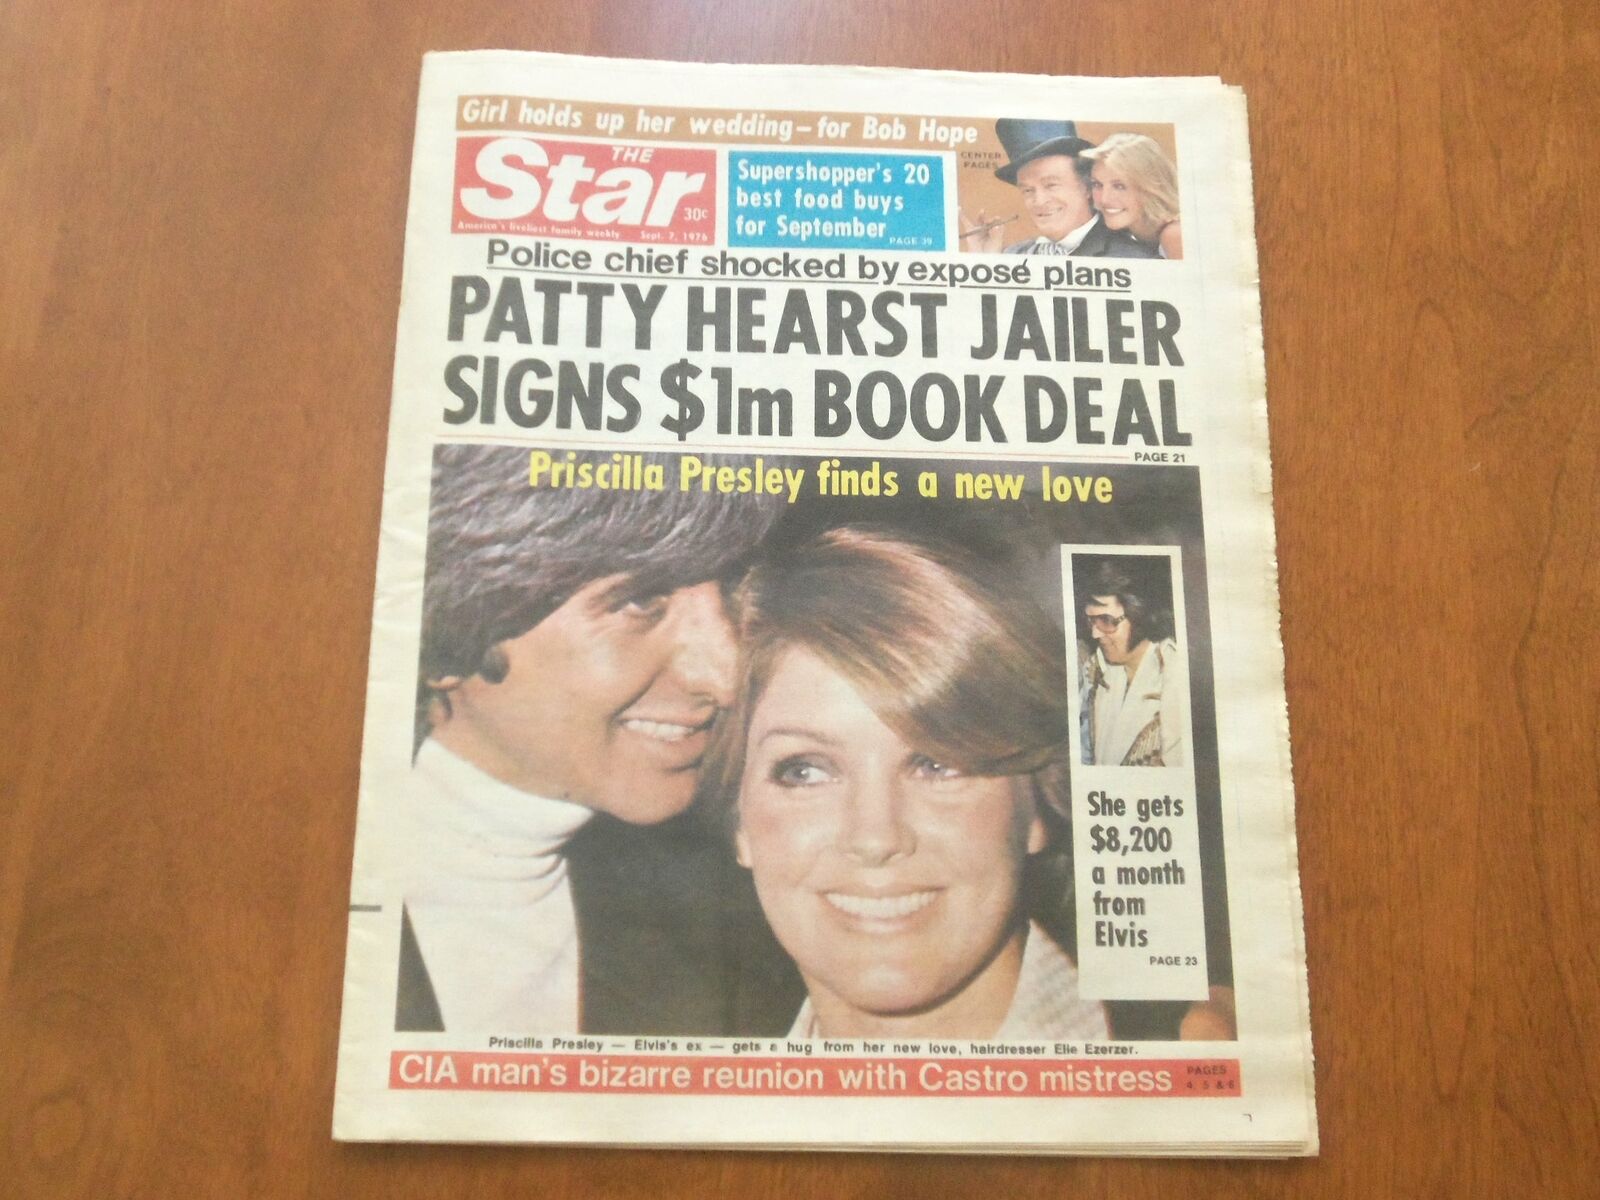 1976 SEPTEMBER 7 THE STAR NEWSPAPER- PRISCILLA PRESLEY FINDS A NEW LOVE- NP 4687